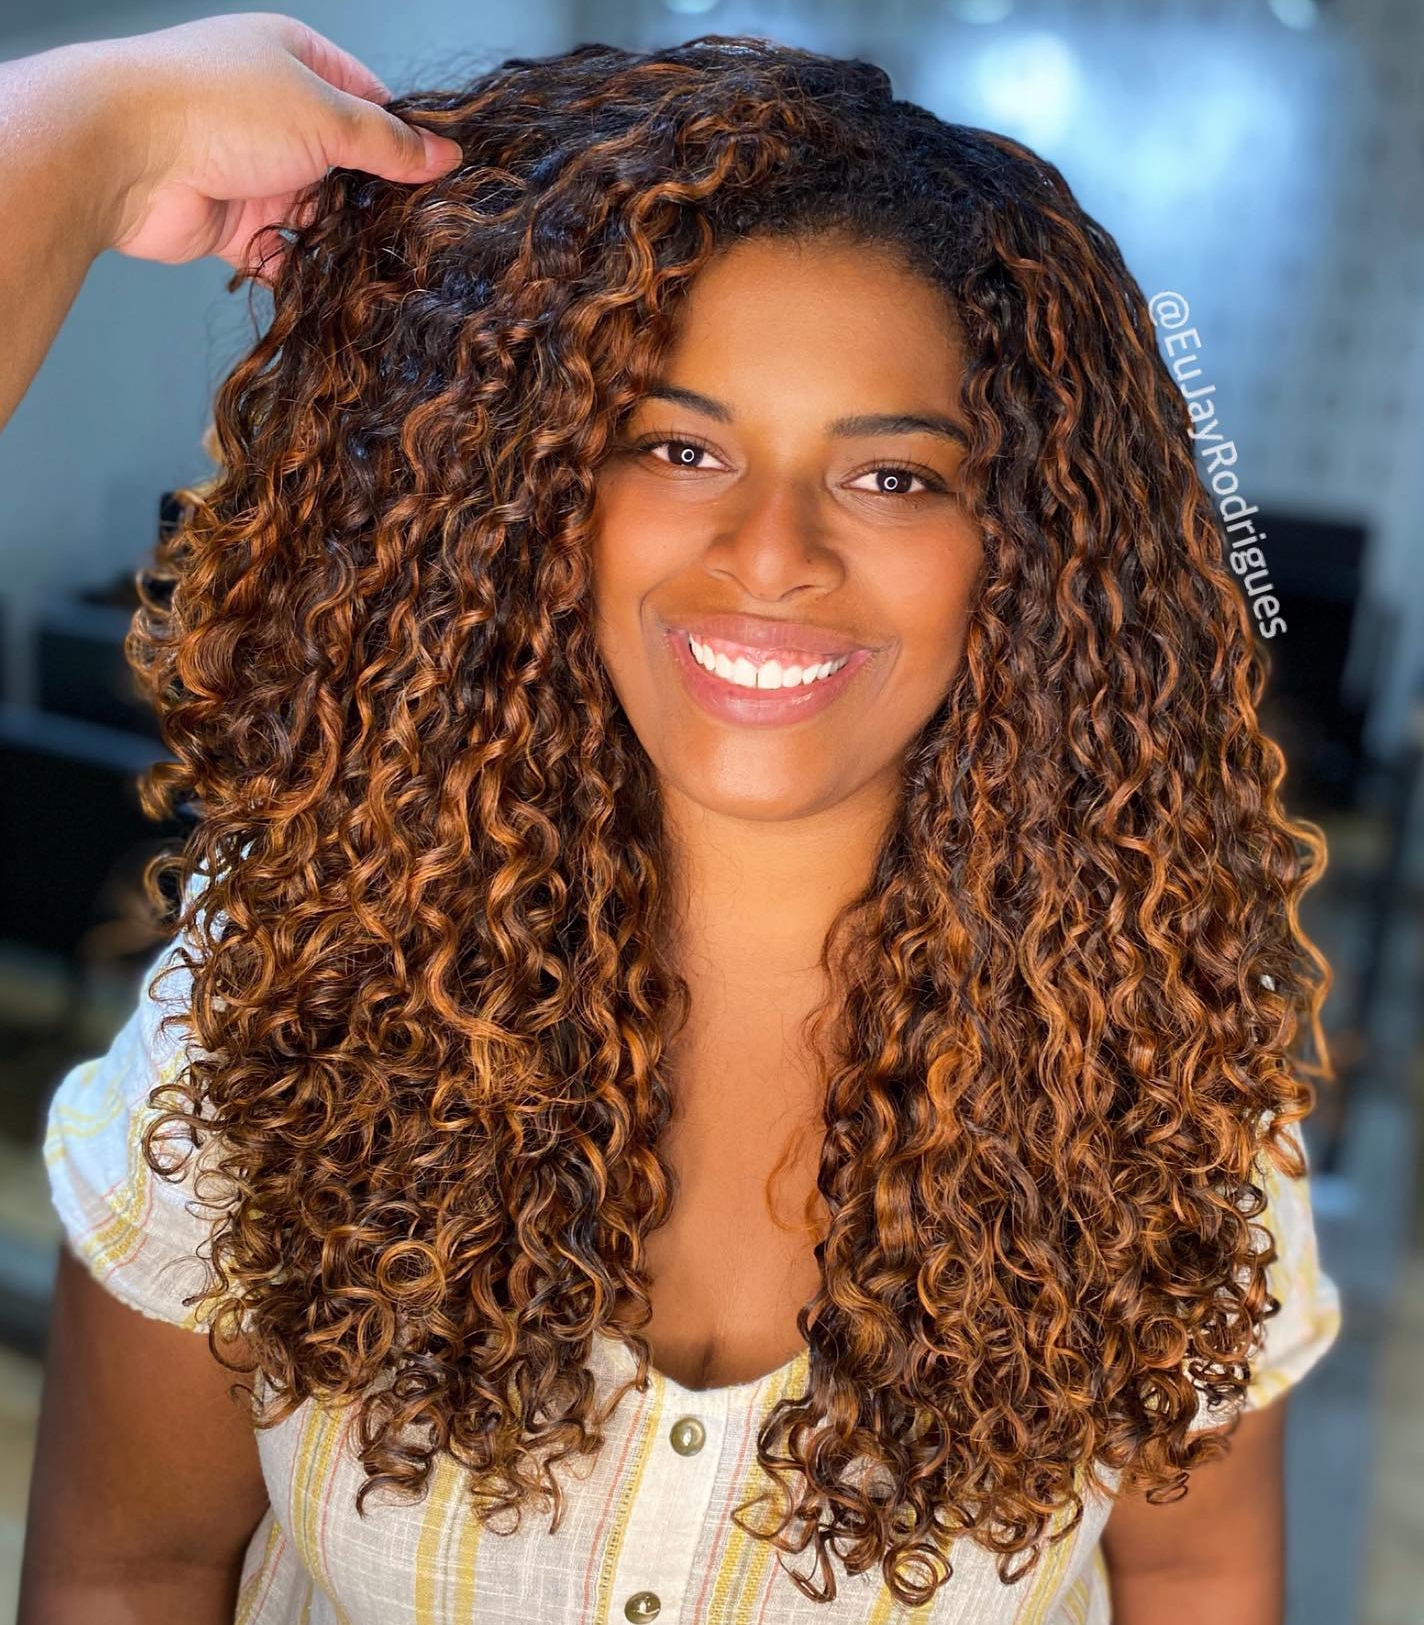 Naturally Curly Hair with Copper Highlights